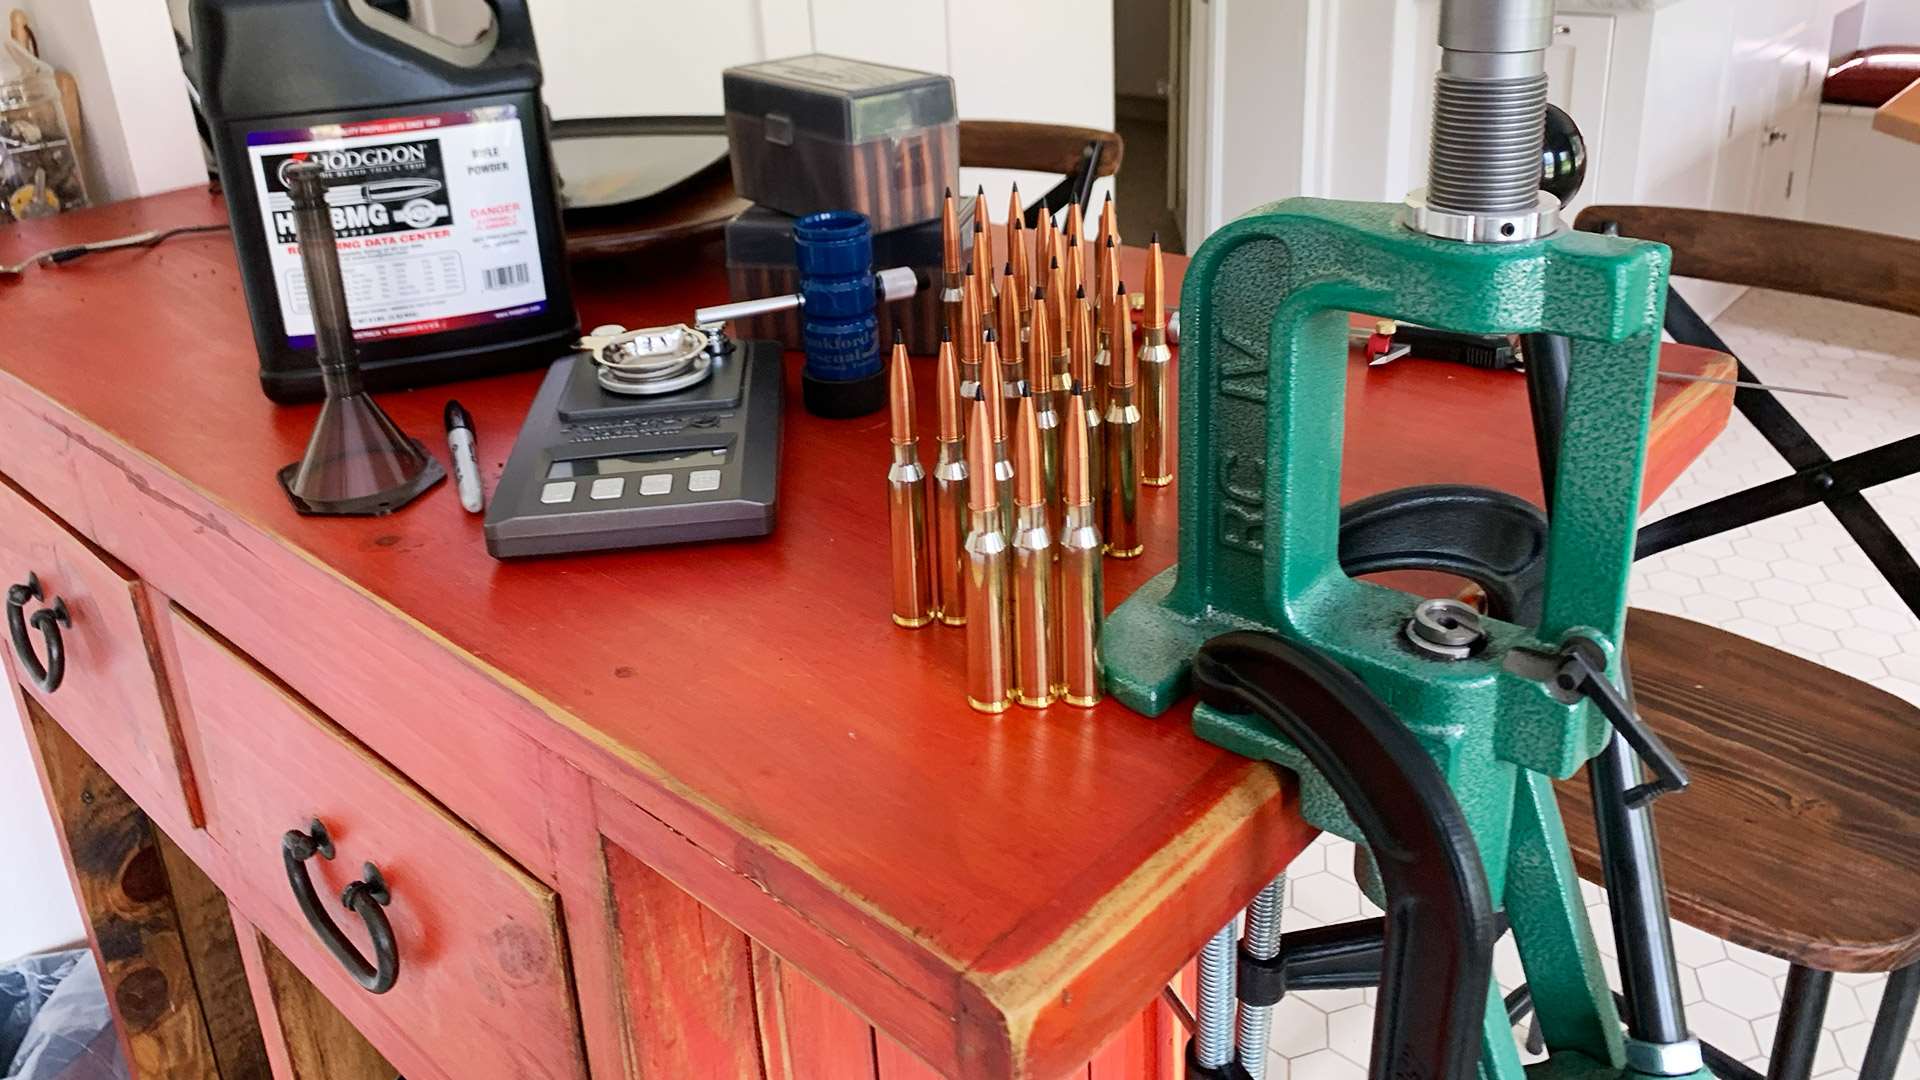 Reloading station with C-clamps